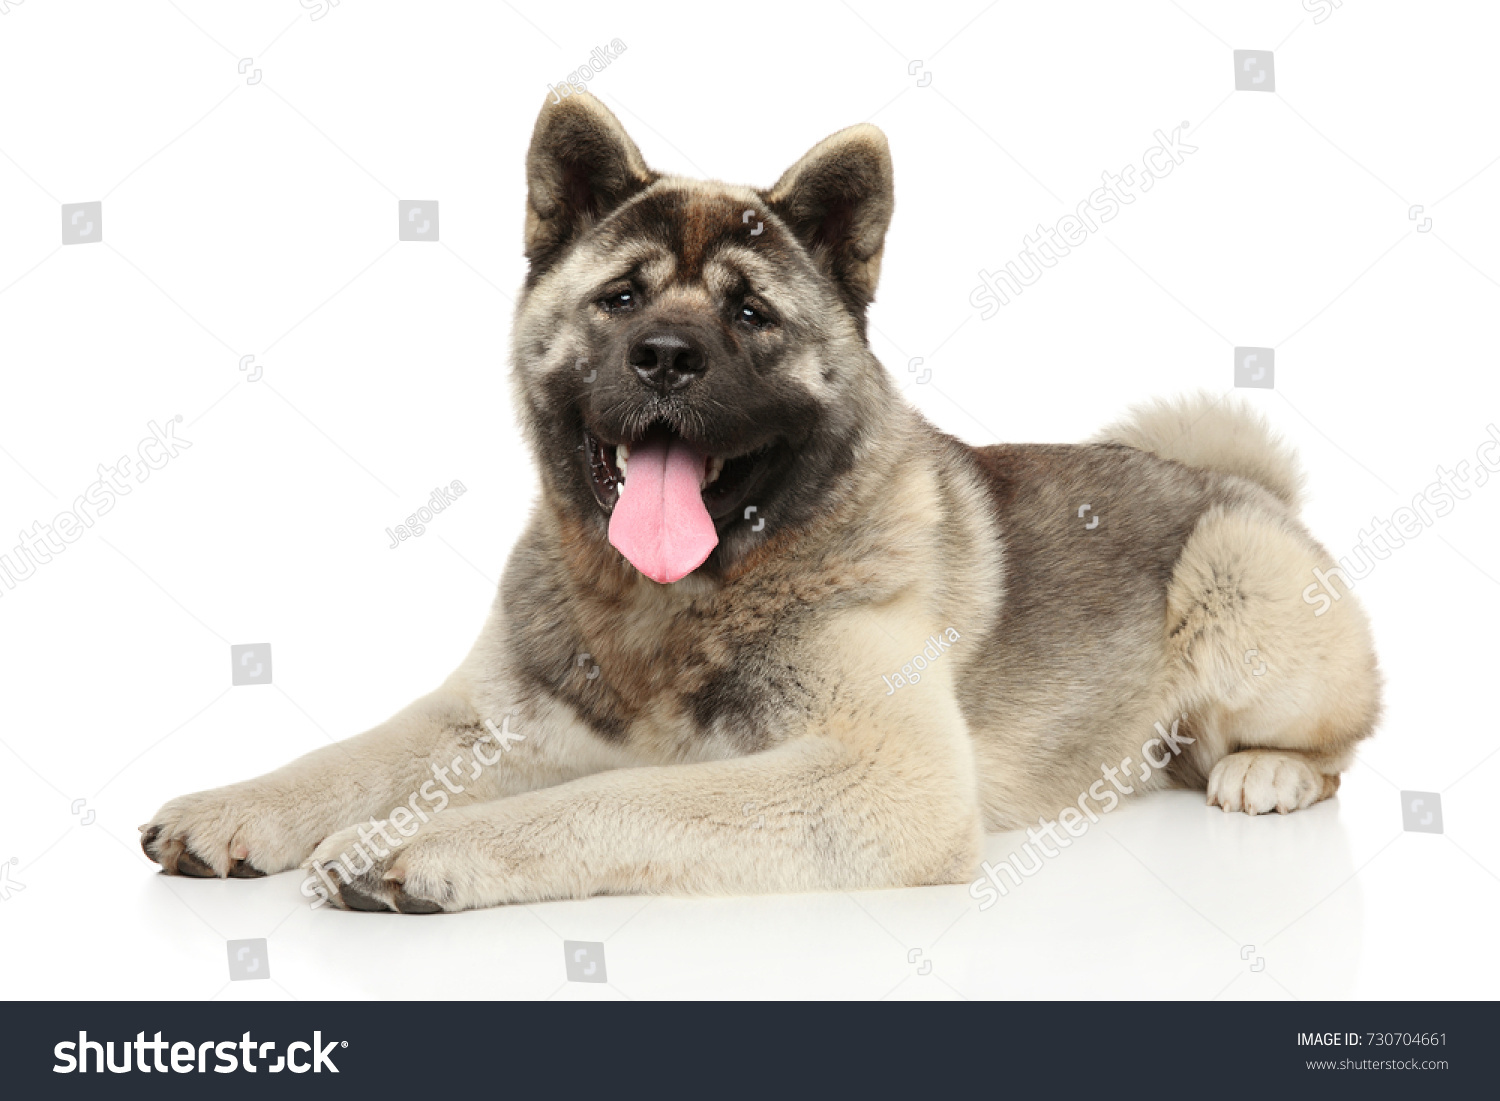 American Akita lying down in front of white background #730704661